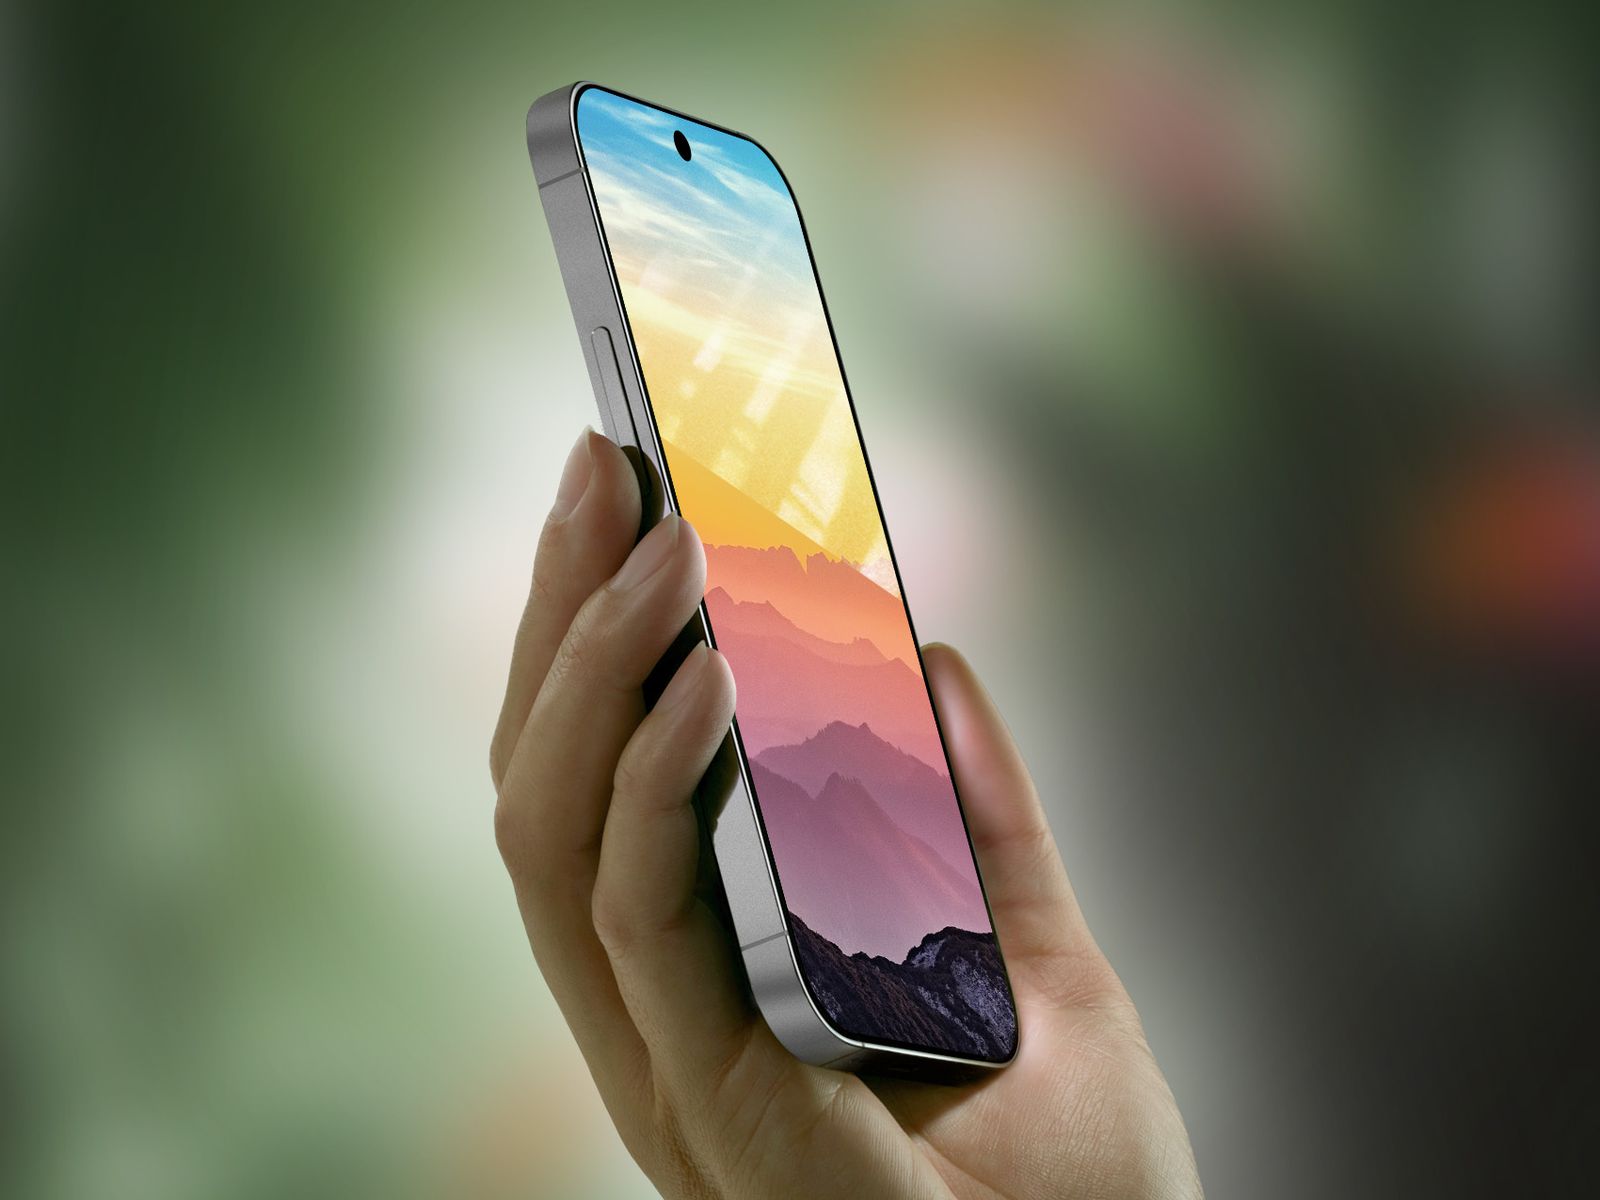 iPhone X Release Date, Features, Pricing and More, News Release